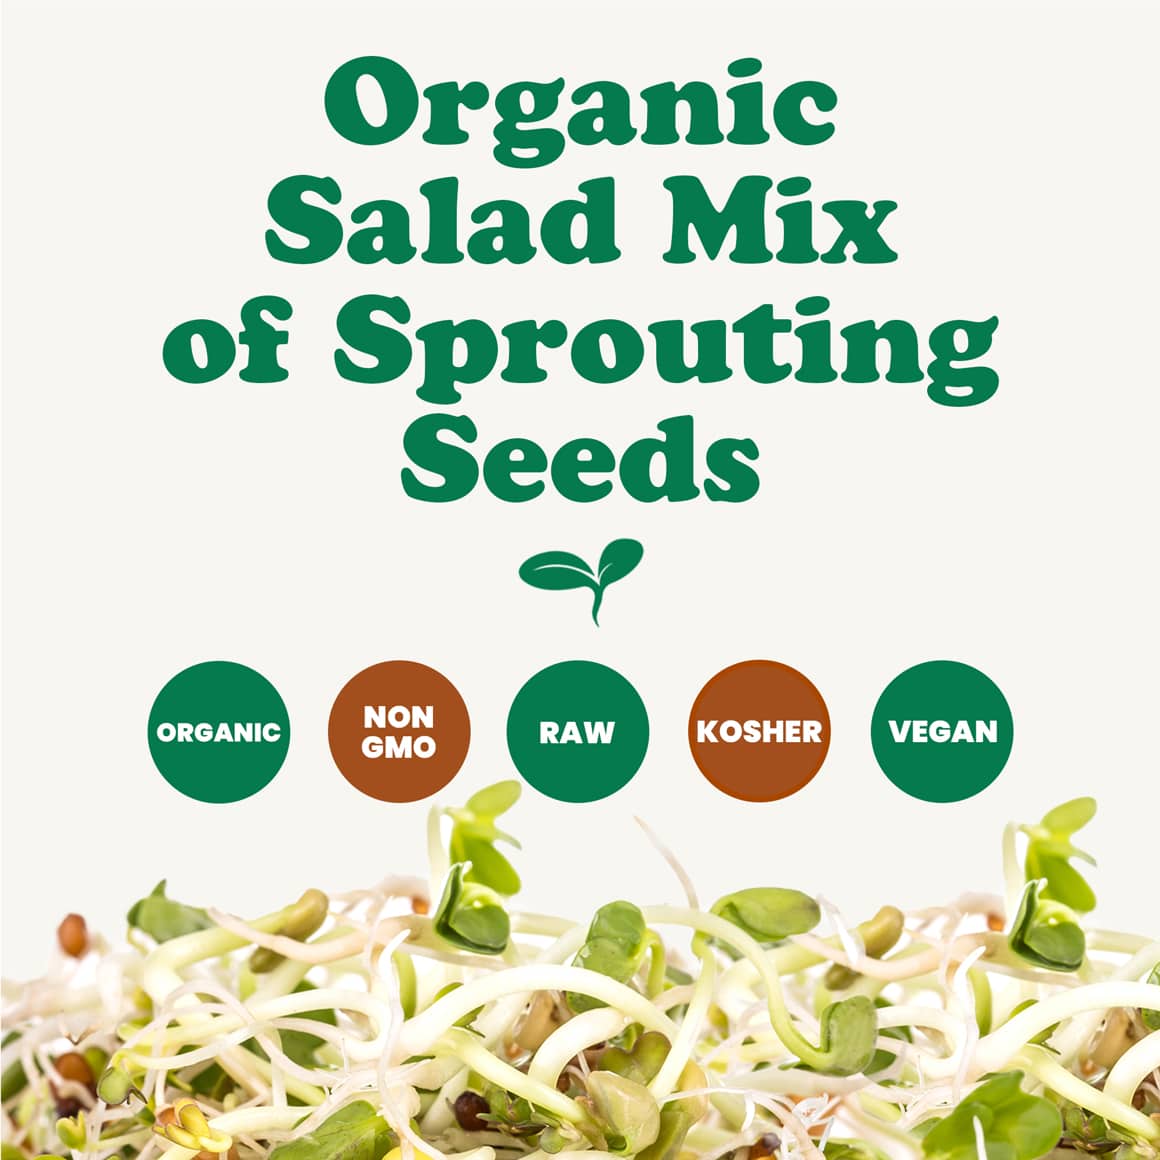 organic-salad-mix-of-sprouting-seeds-2-min